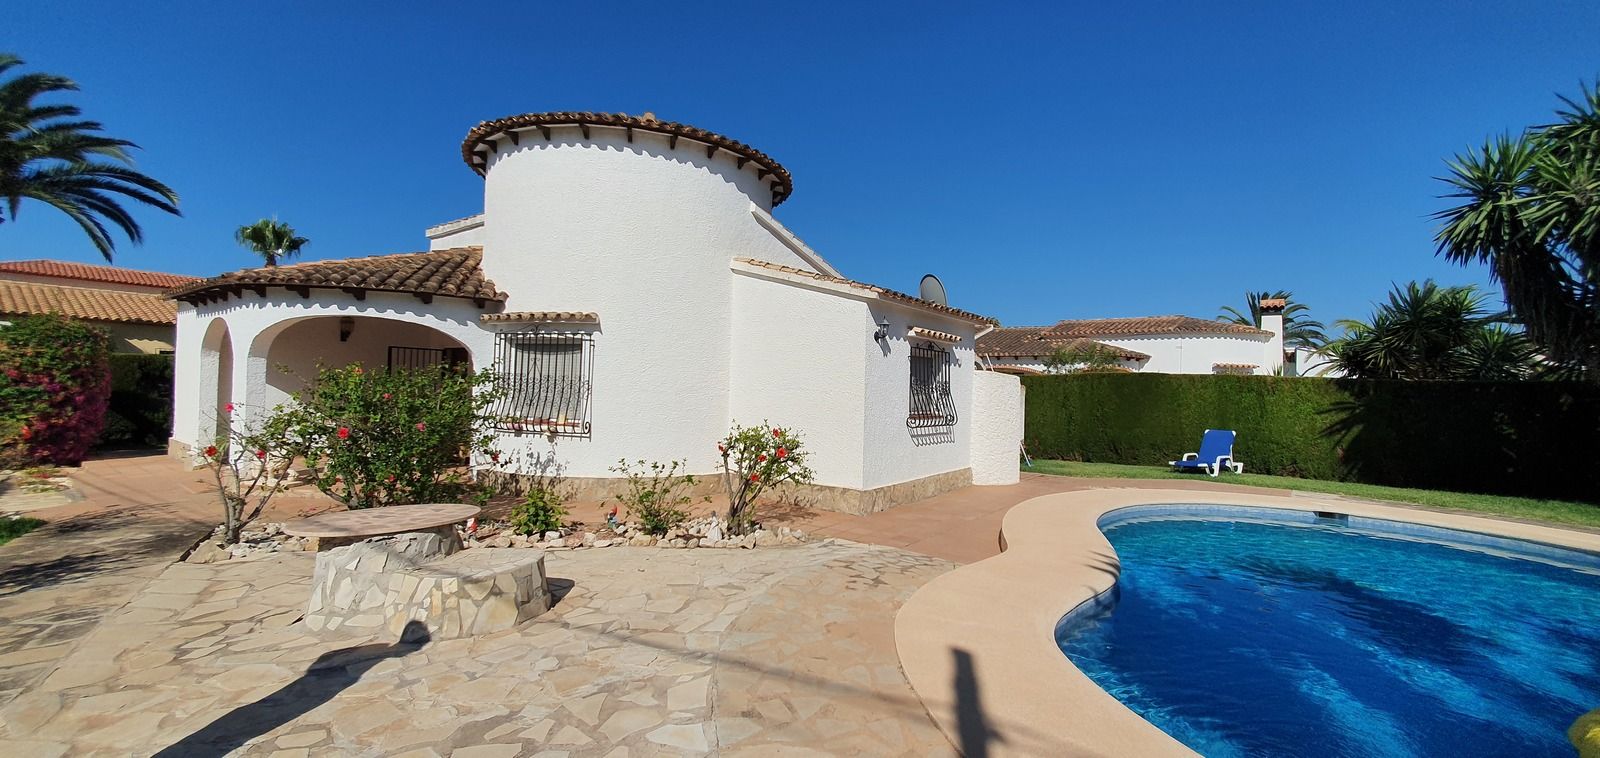 Super nice, newly renovated villa with large corner plot, large pool and winter sun.